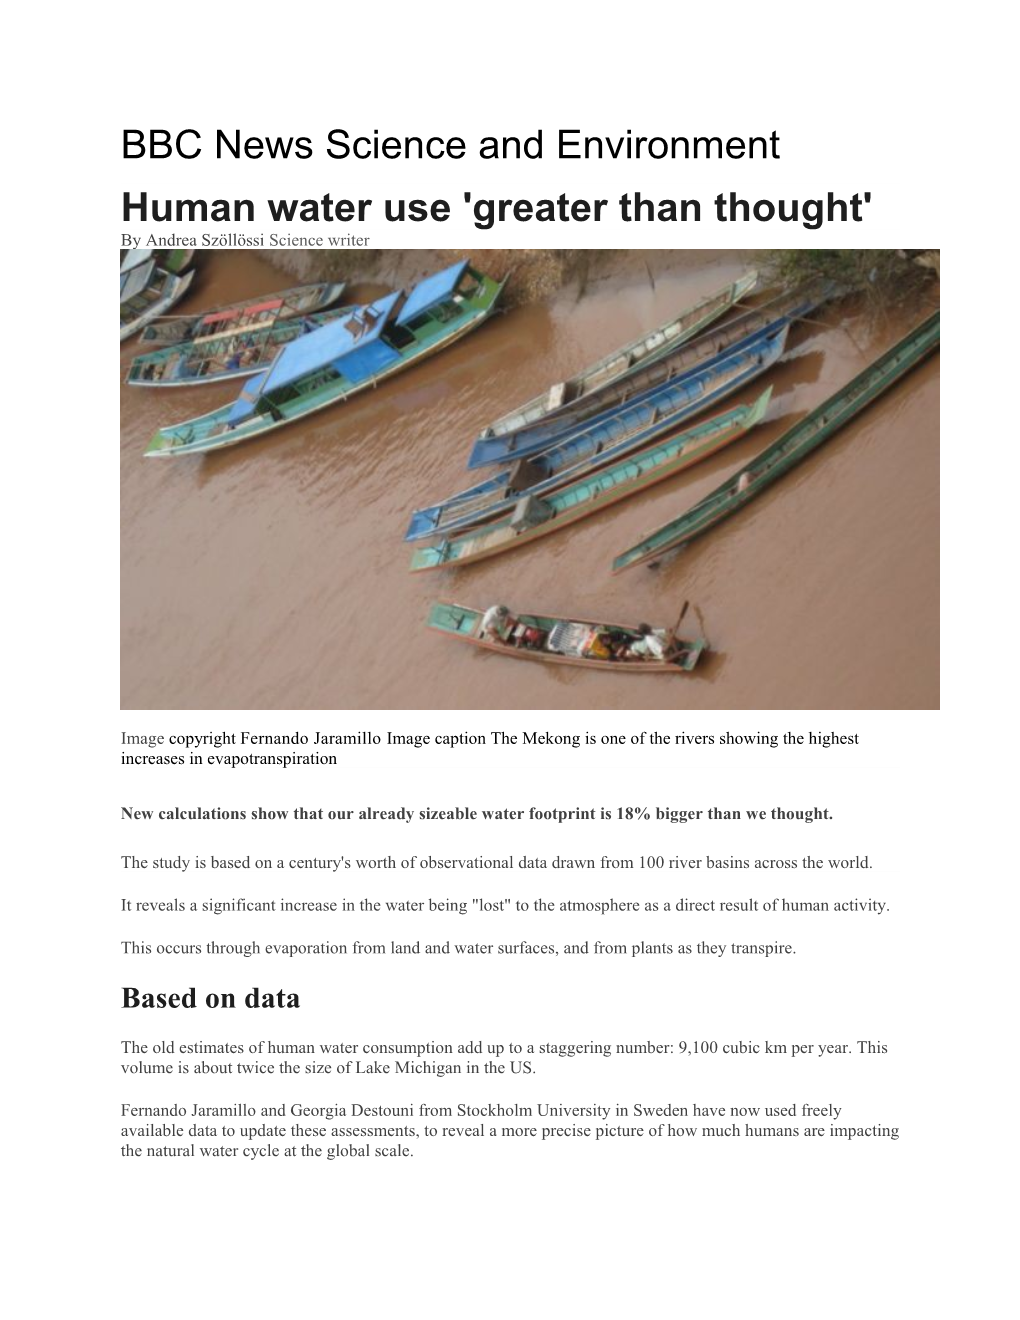 Human Water Use 'Greater Than Thought'